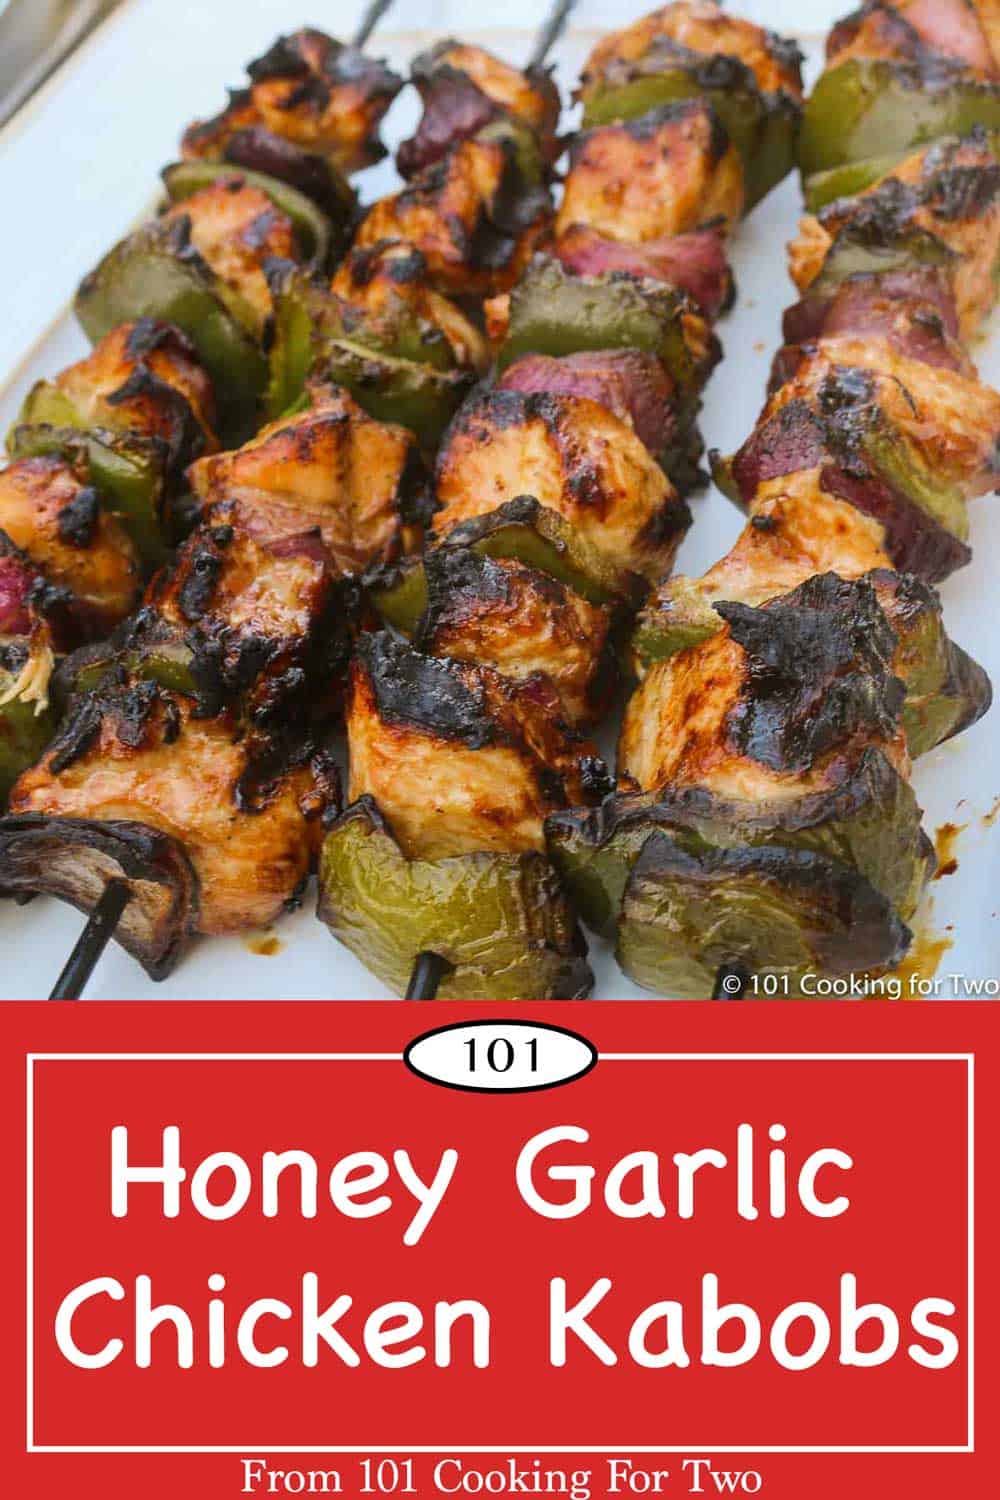 Honey Garlic Chicken Kabobs - 101 Cooking For Two